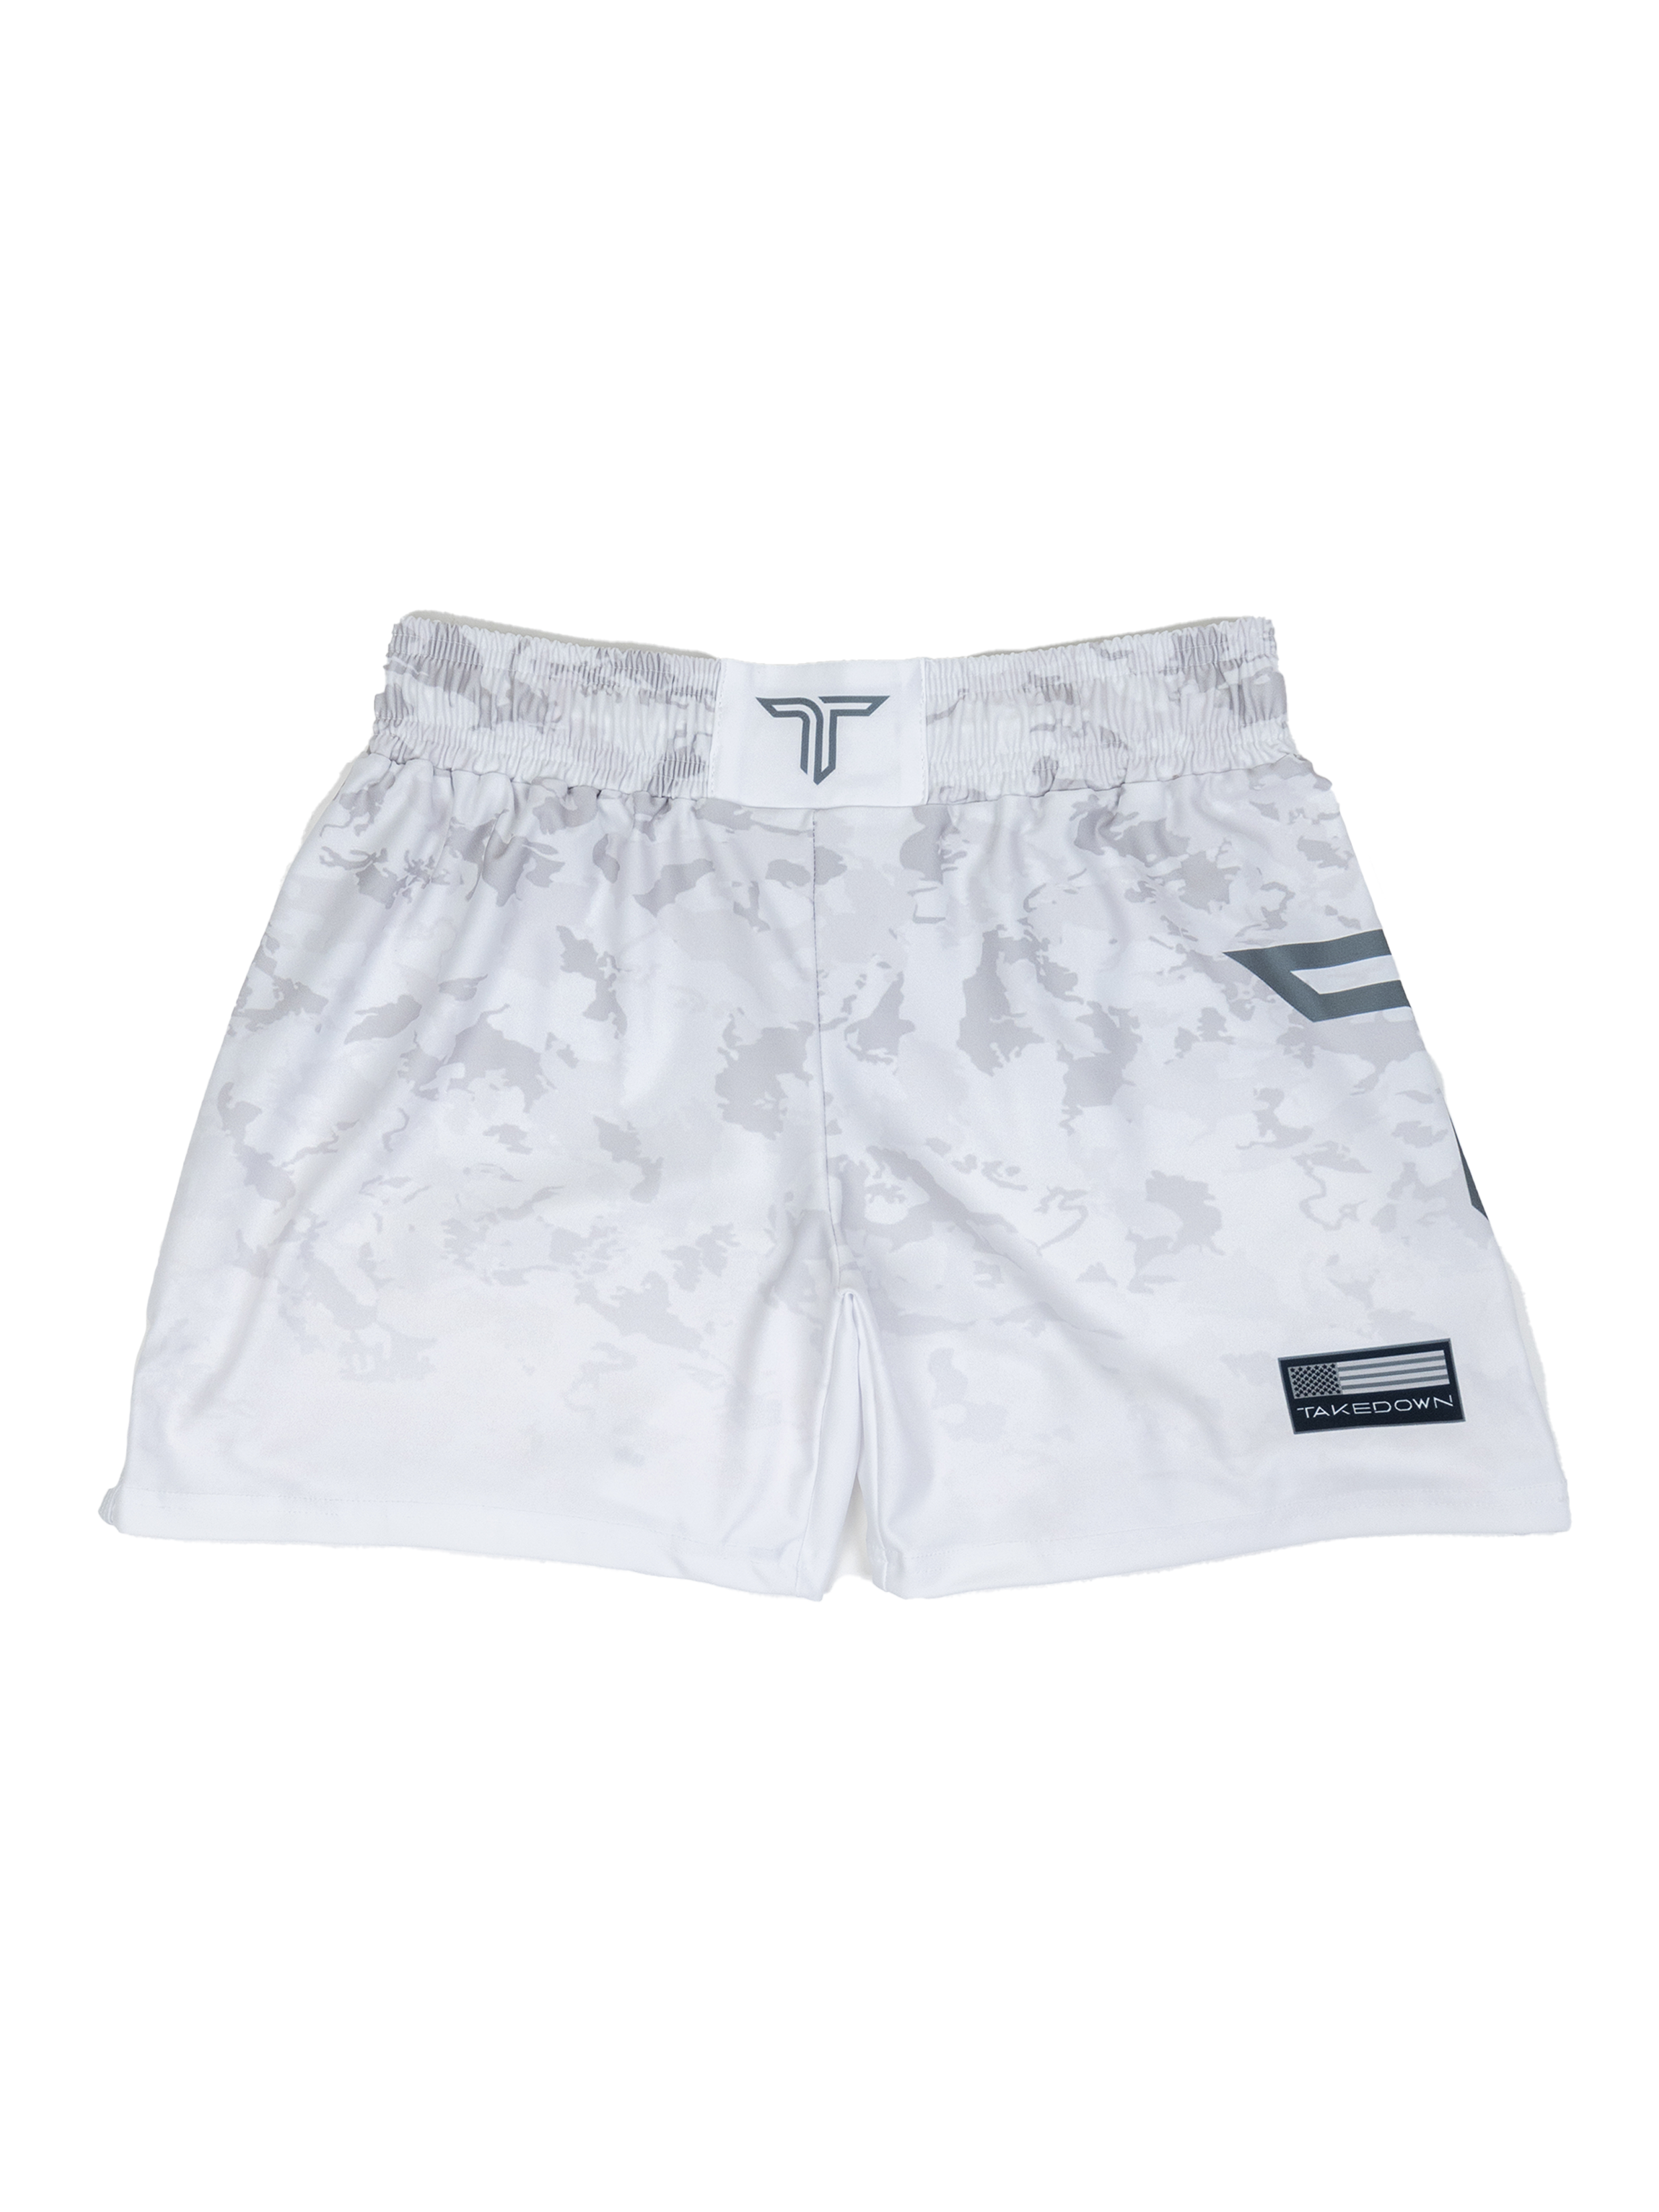 Particle Camo Fight Shorts - Ghost Grey (5